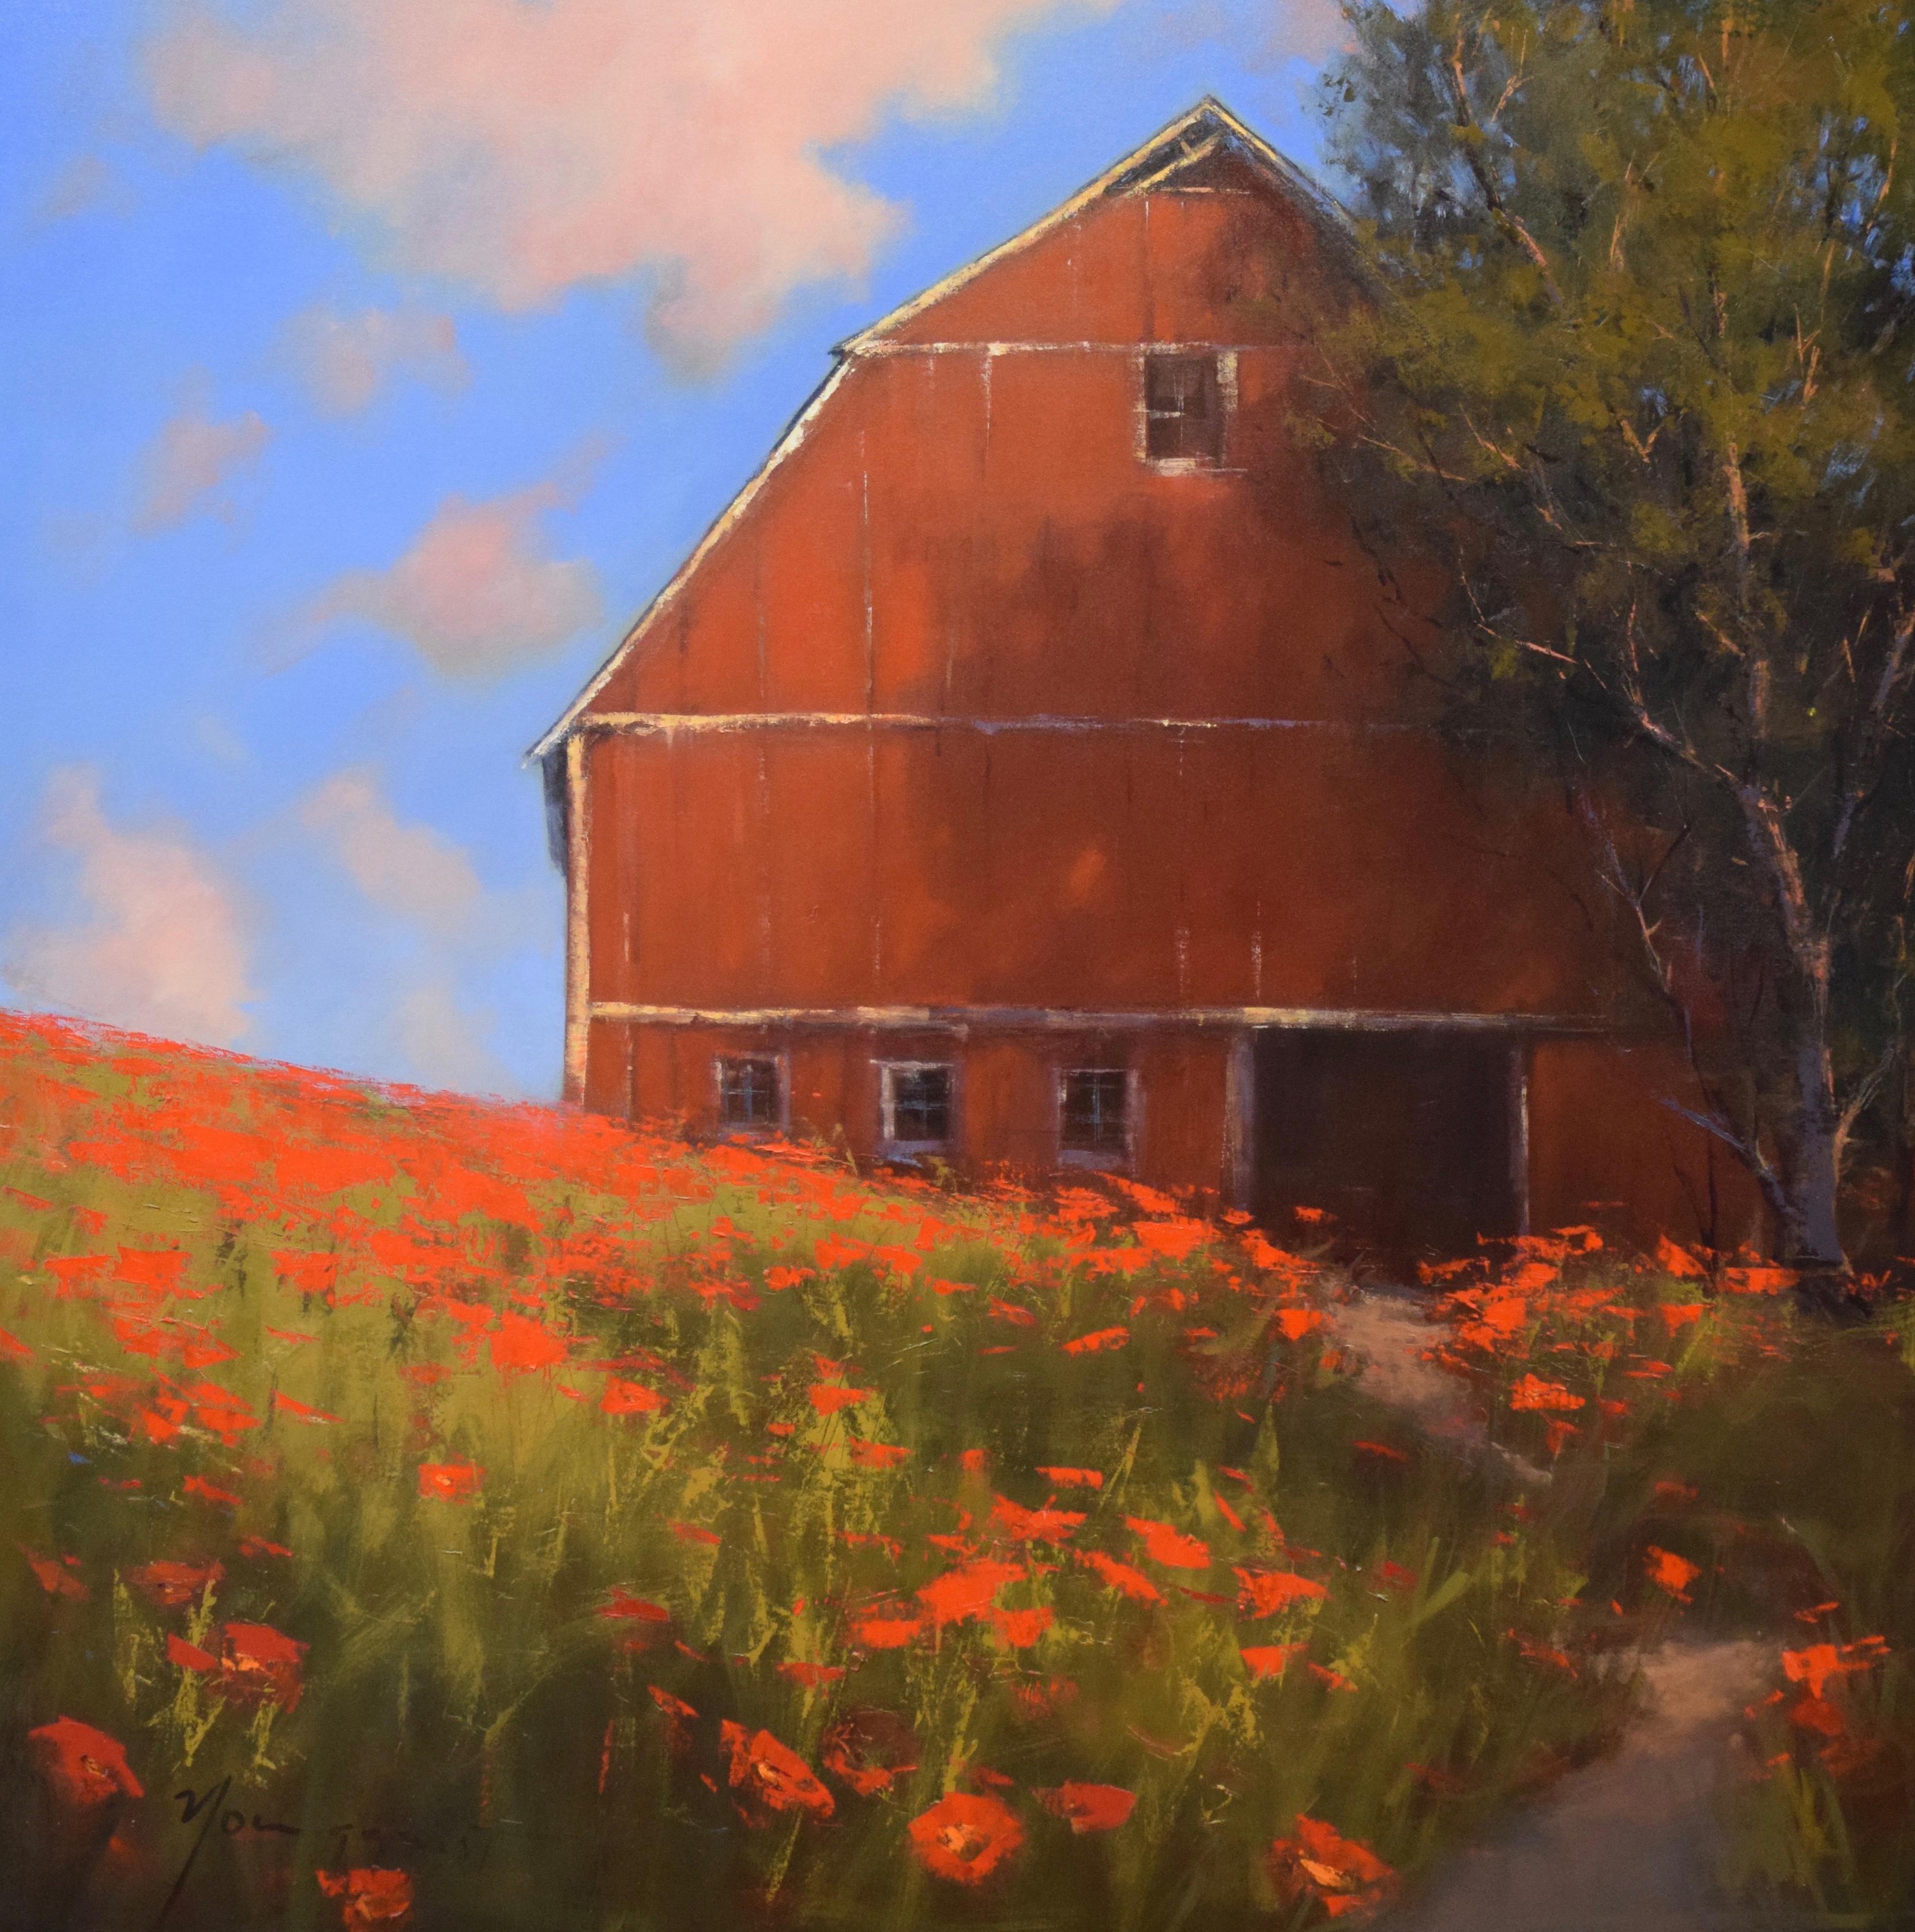 Romona Youngquist, Landscape Painting - "Barn in Summer"